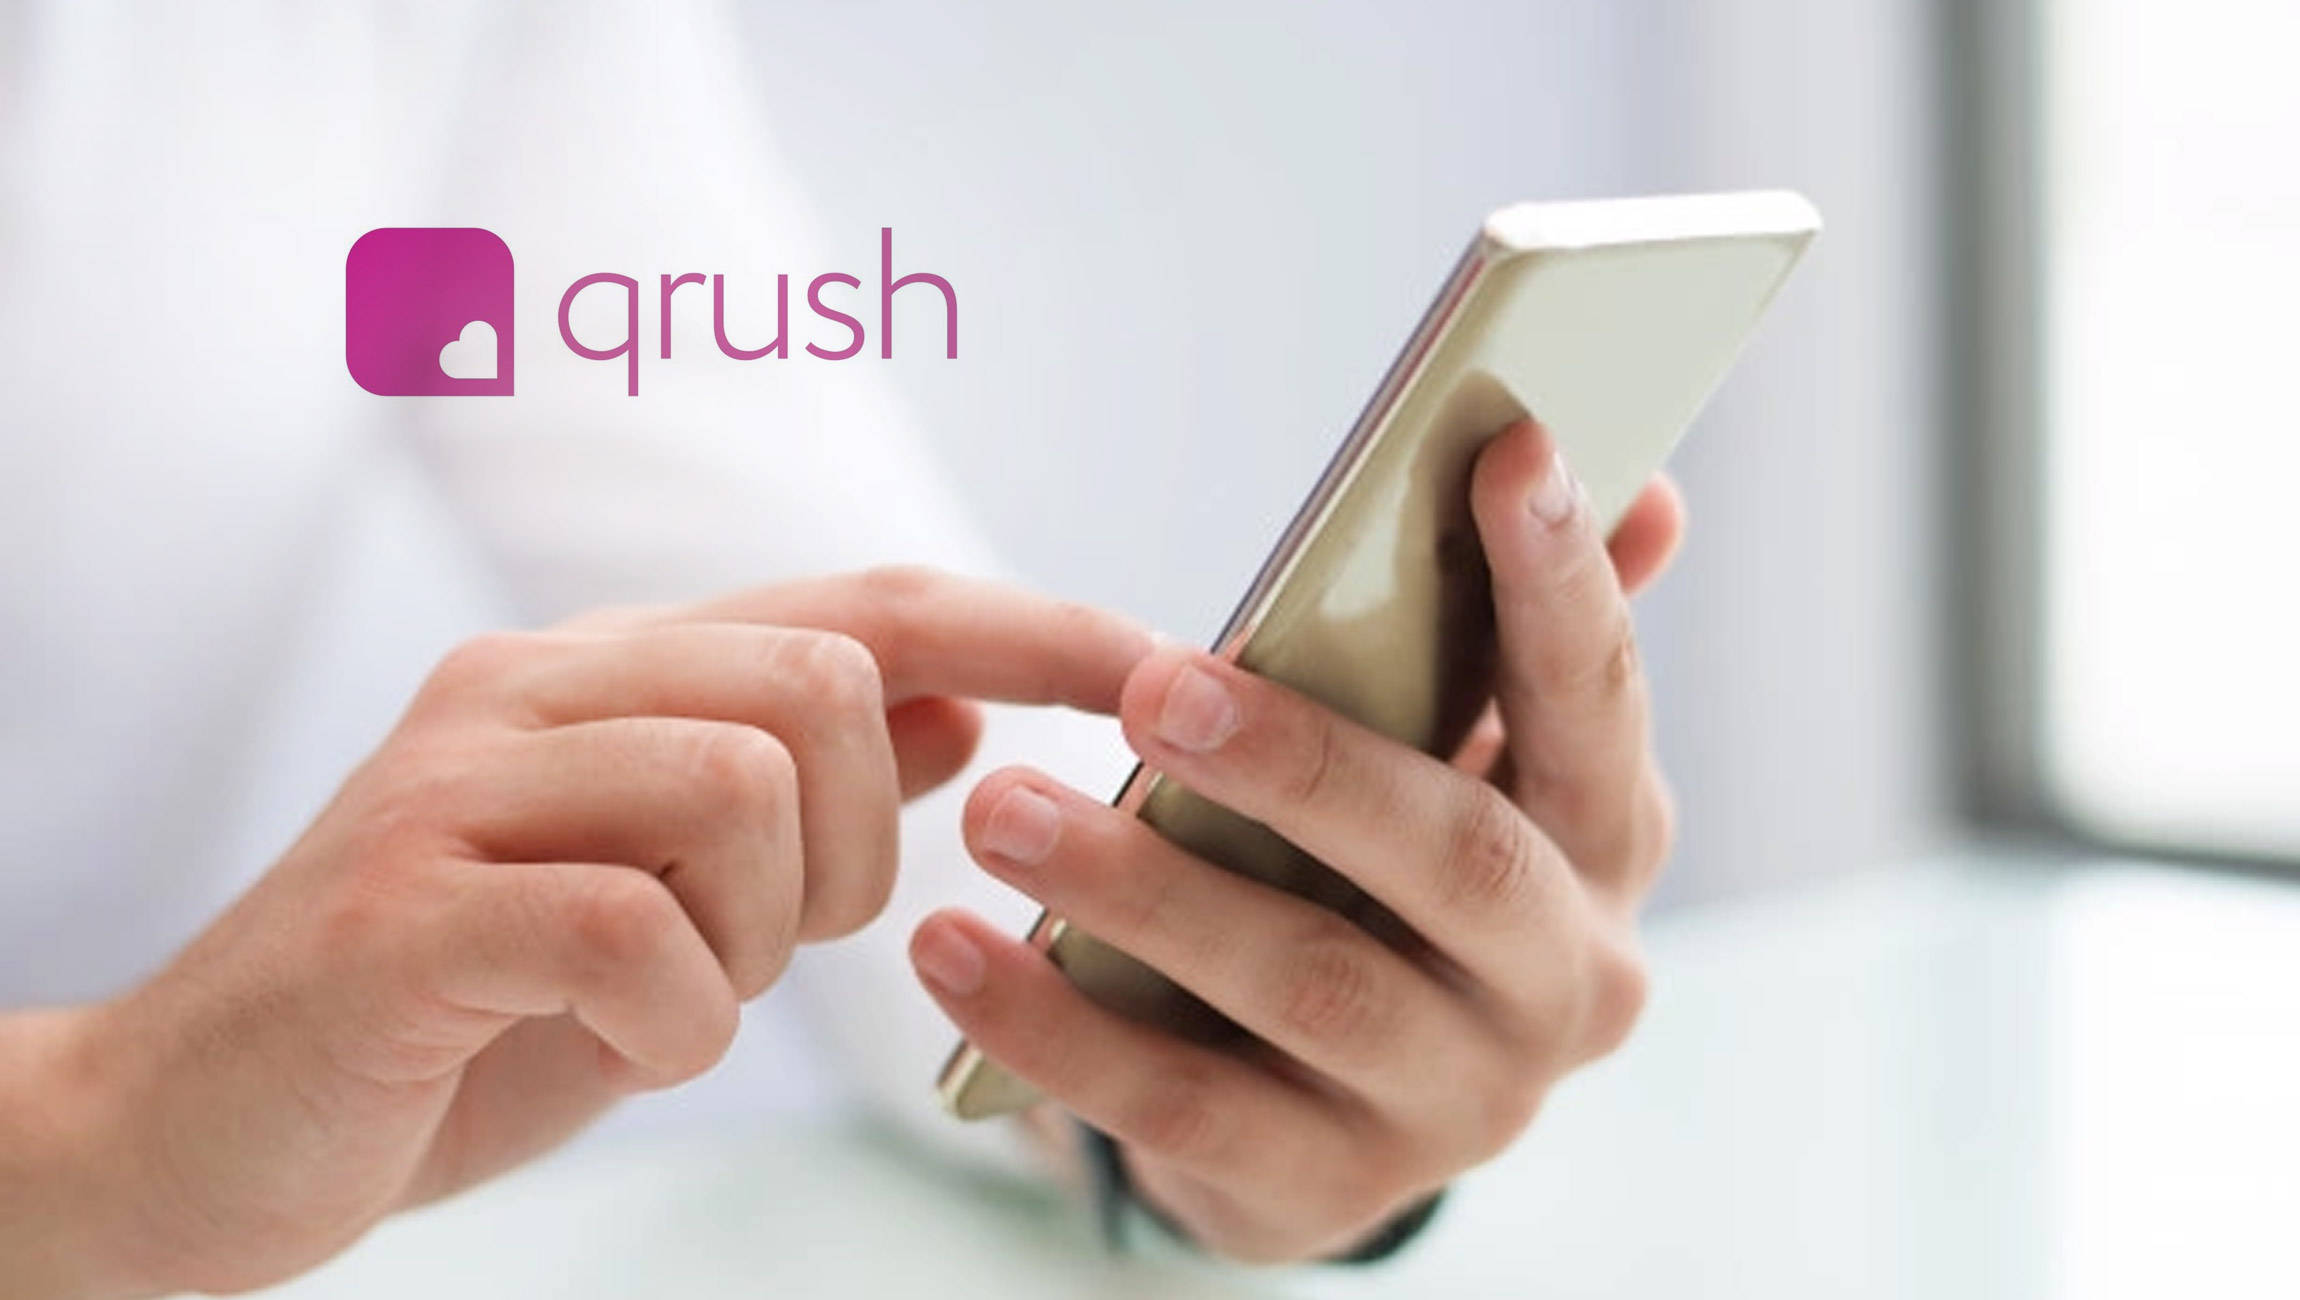 qrush: Latest Mobile App for Content Sales Pays 90% to Creators